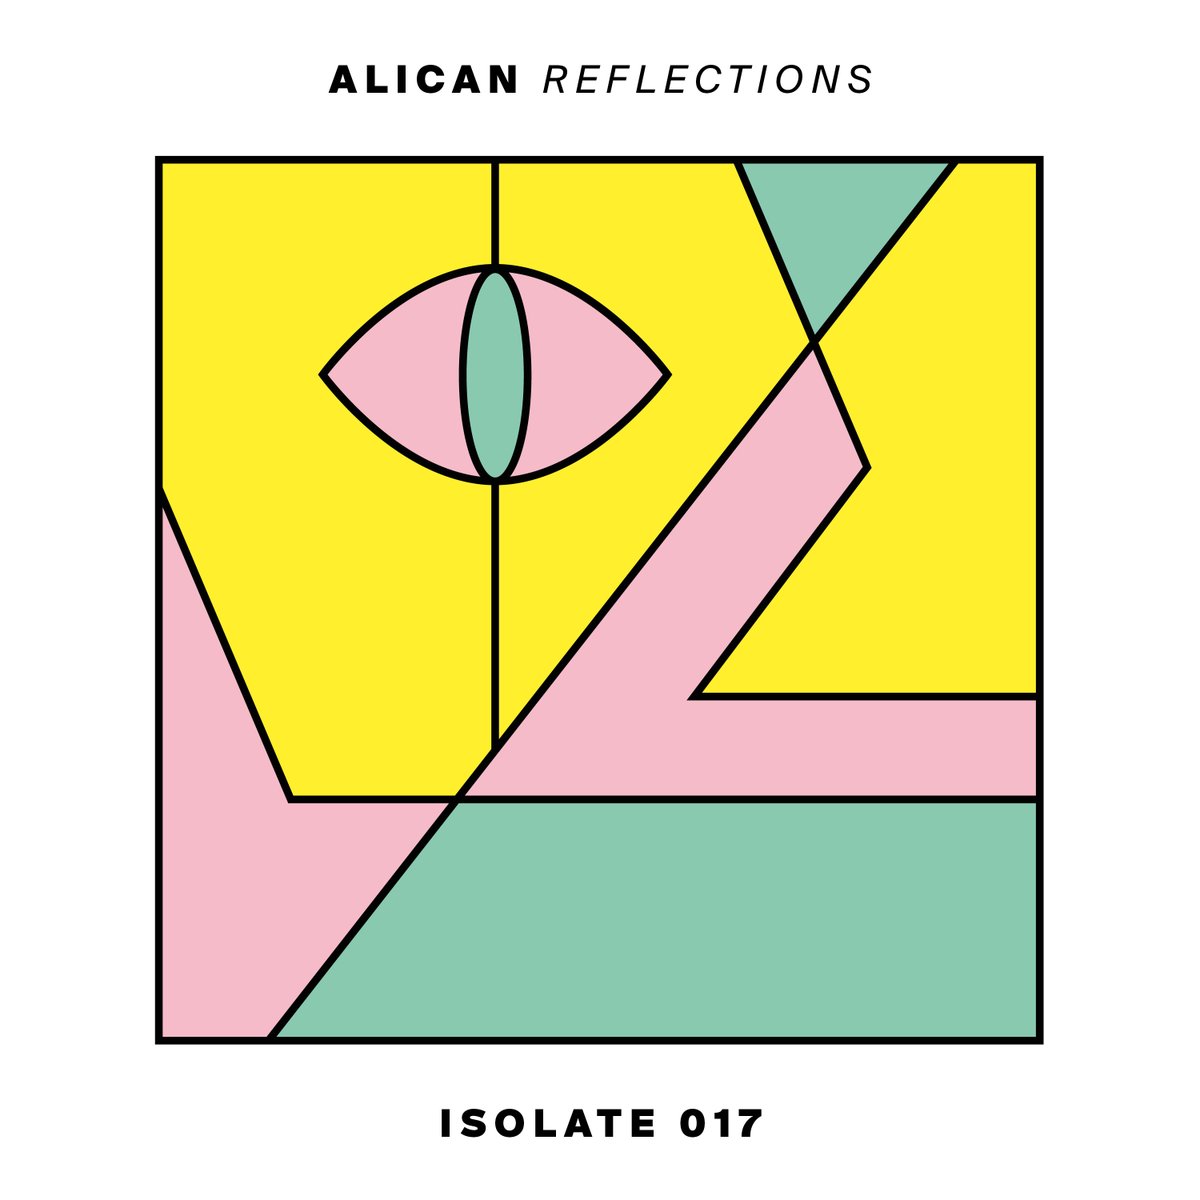 Happily announcing our next release ISO017 “Reflections” EP by Alican is pre-order available on Beatport now! Journey of 'Reflections' starts with the Spotify-only version of Floridiana. Stream and pre-order from the link in BIO